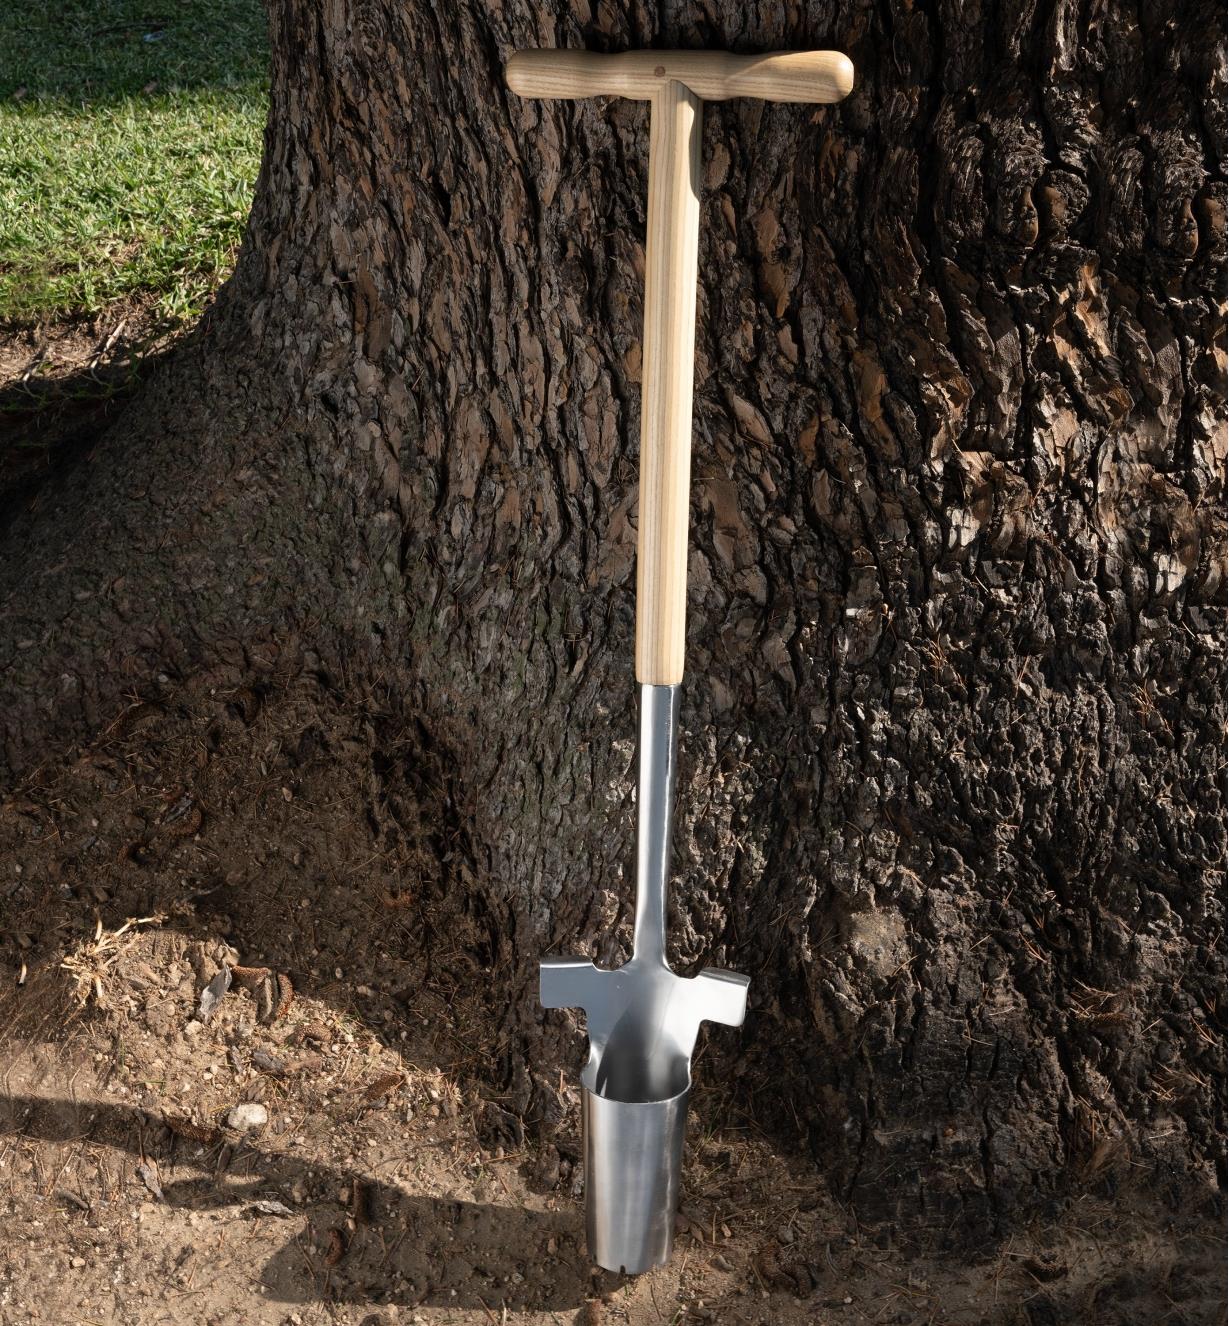 The bulb planter rests against a tree